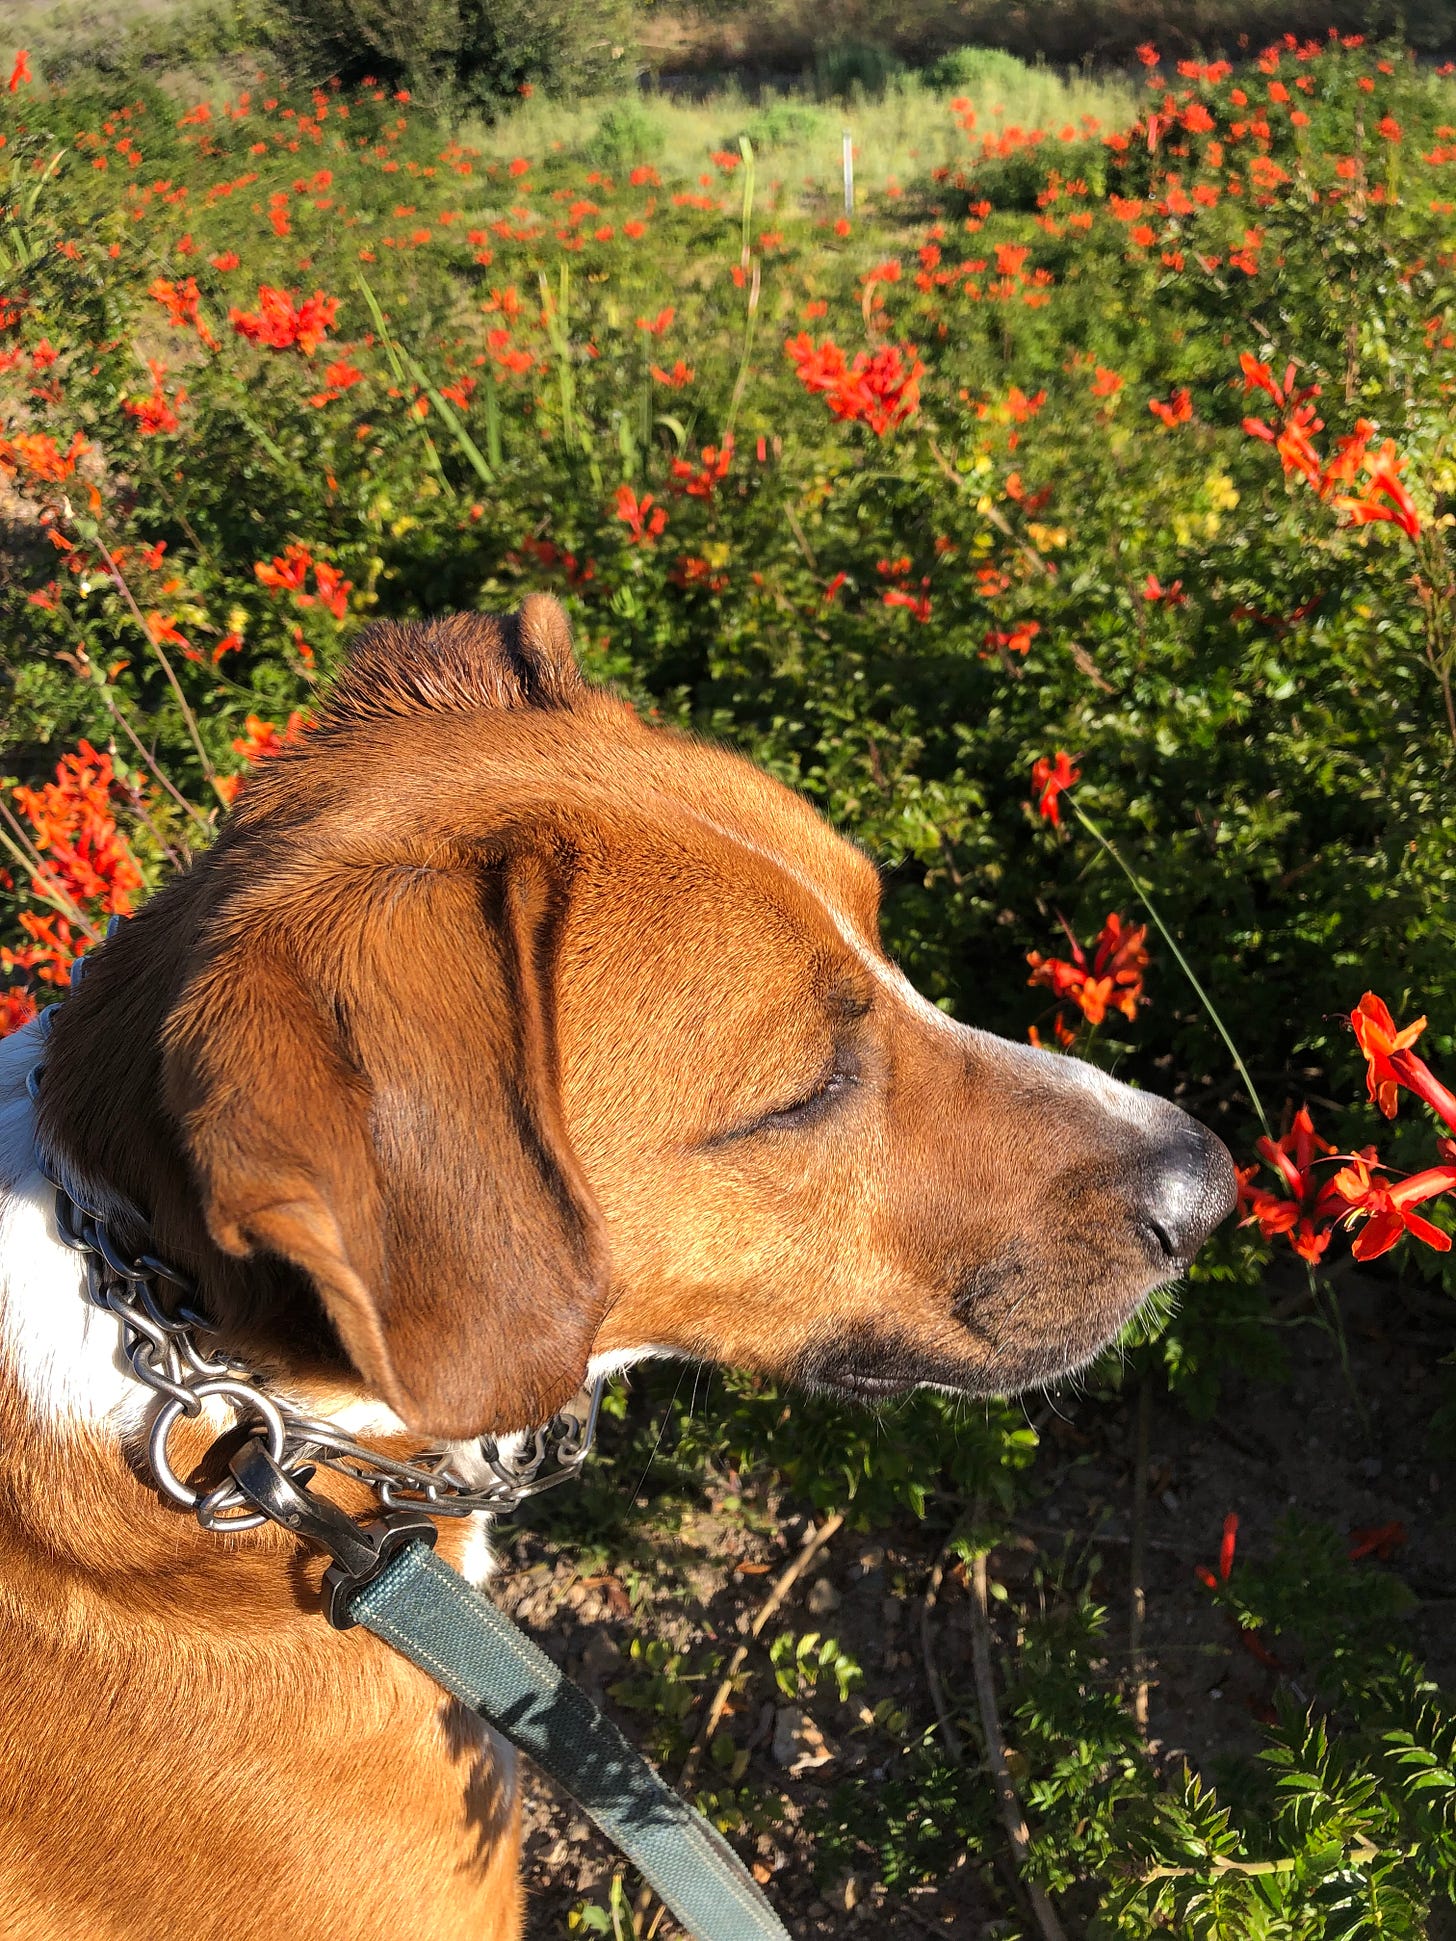 A russet dog with white markings looking out over a field of shrubs with red trumpet flowers